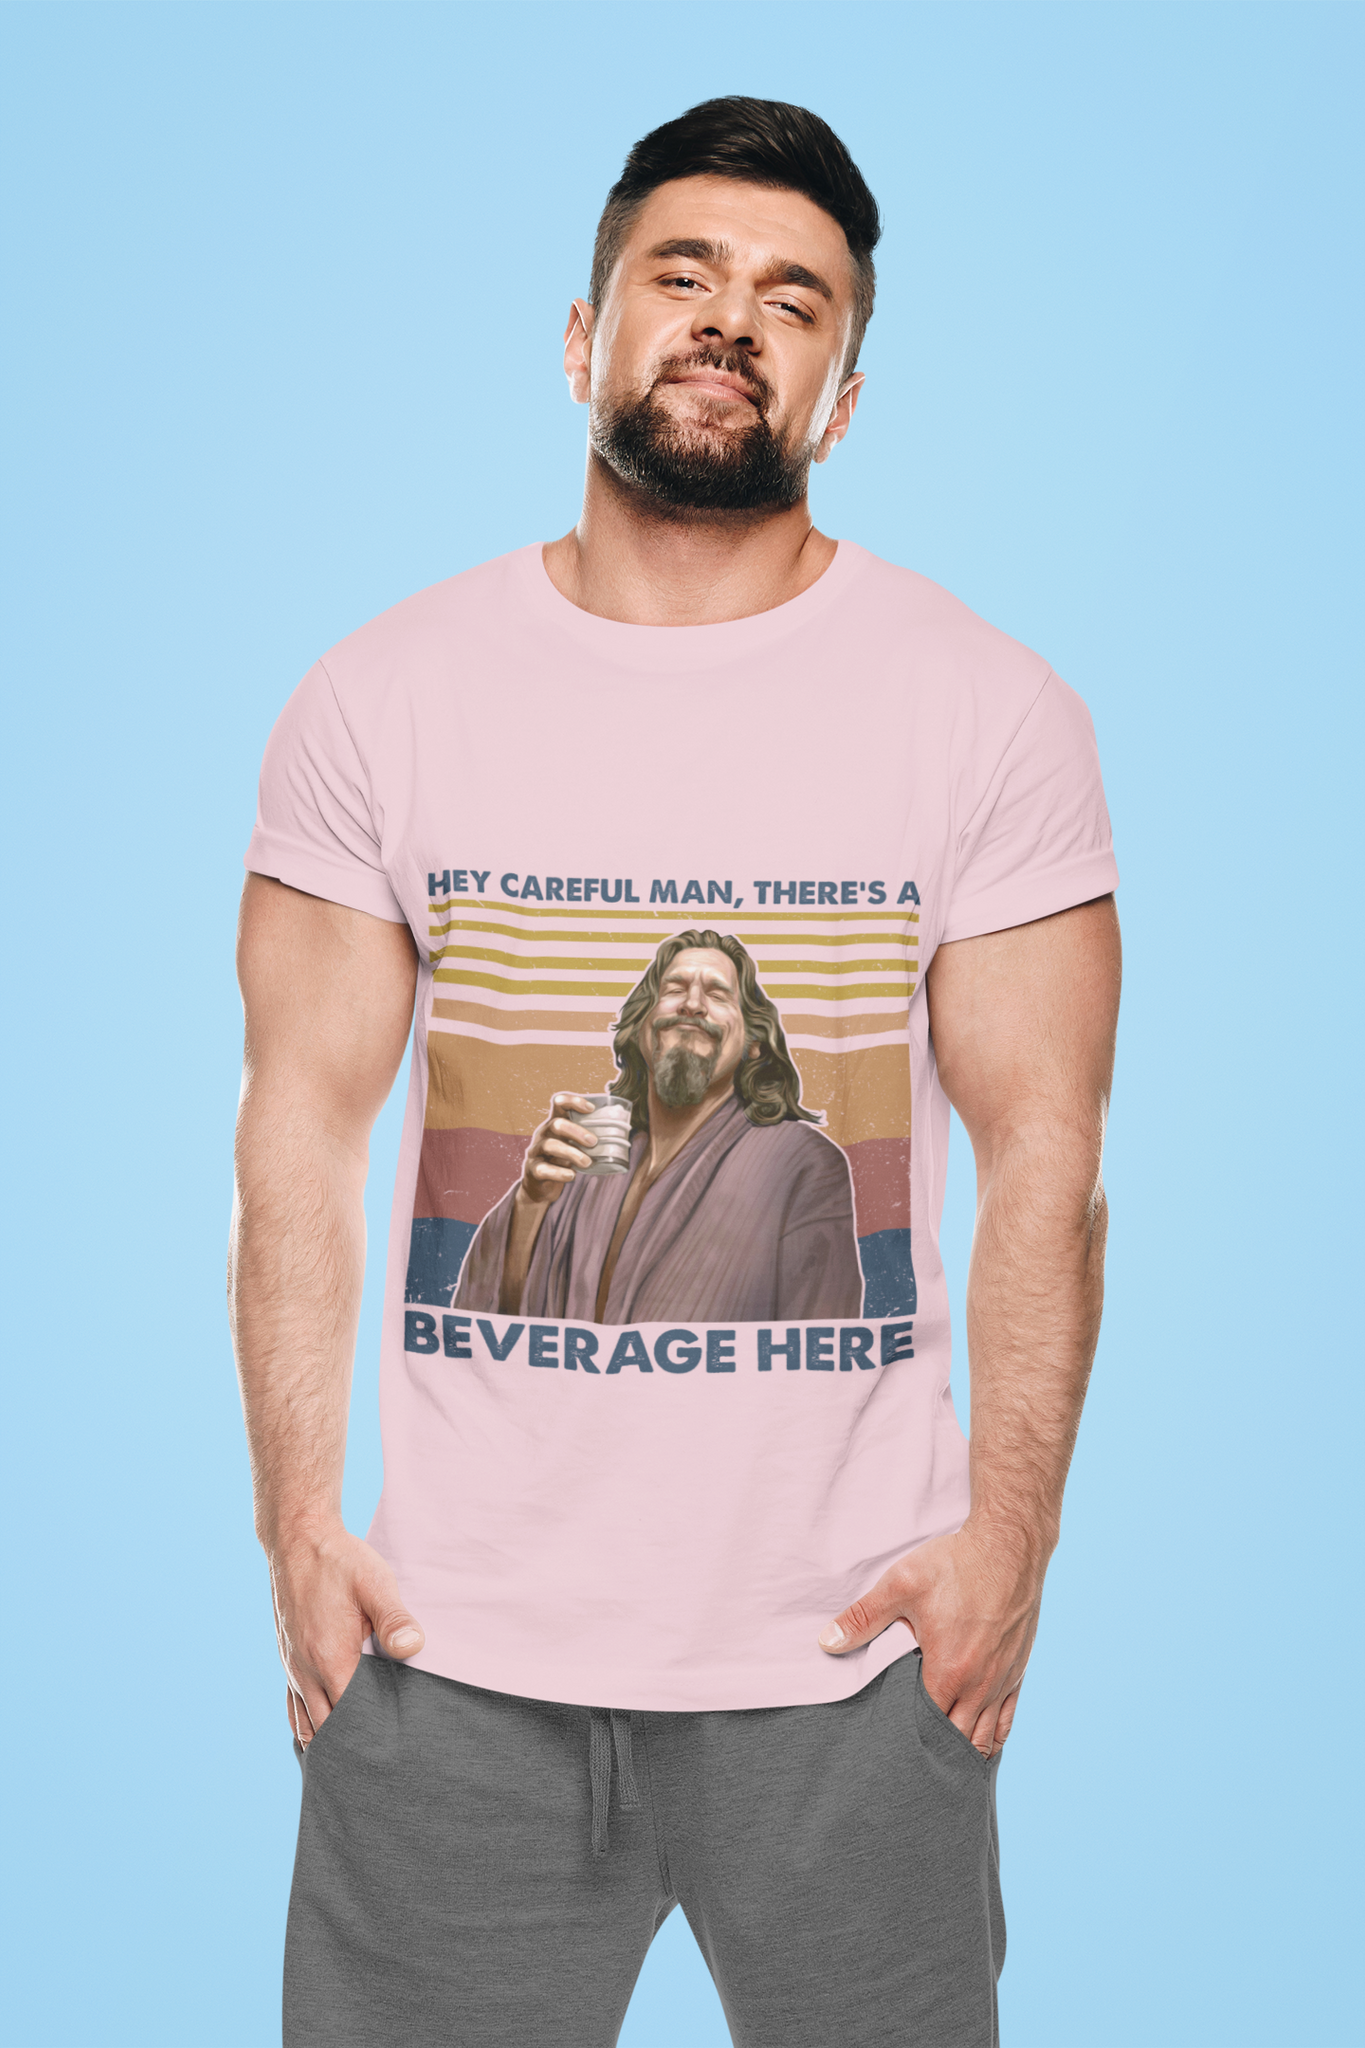 The Big Lebowski T Shirt, The Dude Tshirt, Hey Careful Man Theres A Beverage Here T shirt